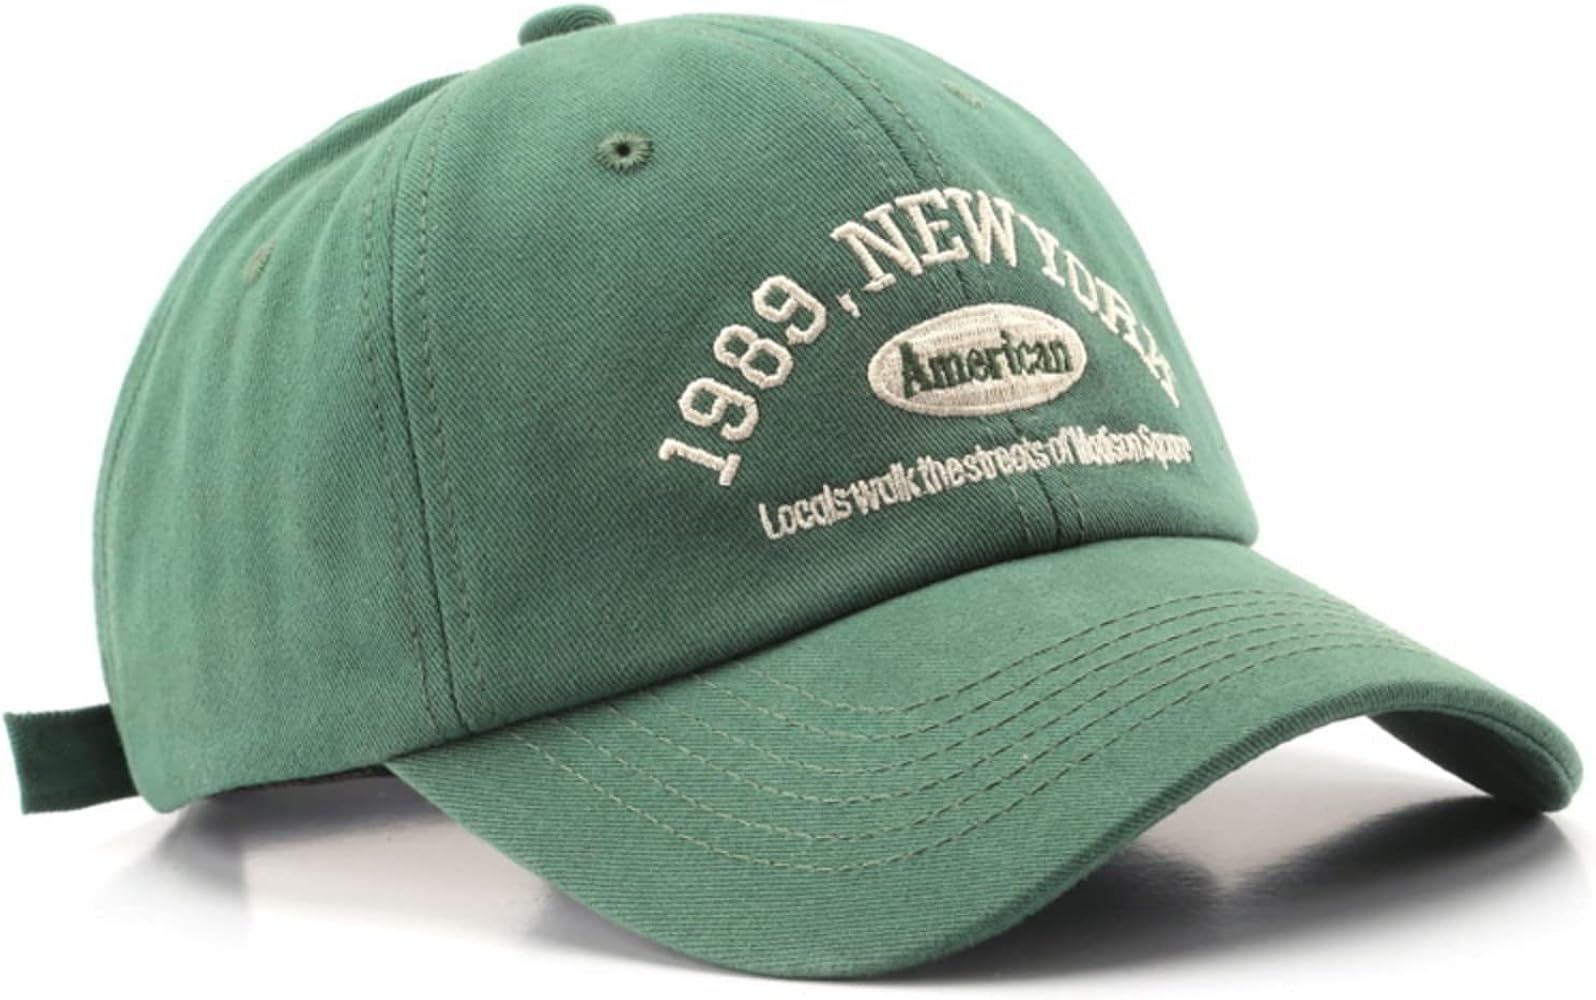 1989 New York Embroidery Baseball Cap for Men Women Adjustable Distressed Vintage Washed Dad Hat | Amazon (US)